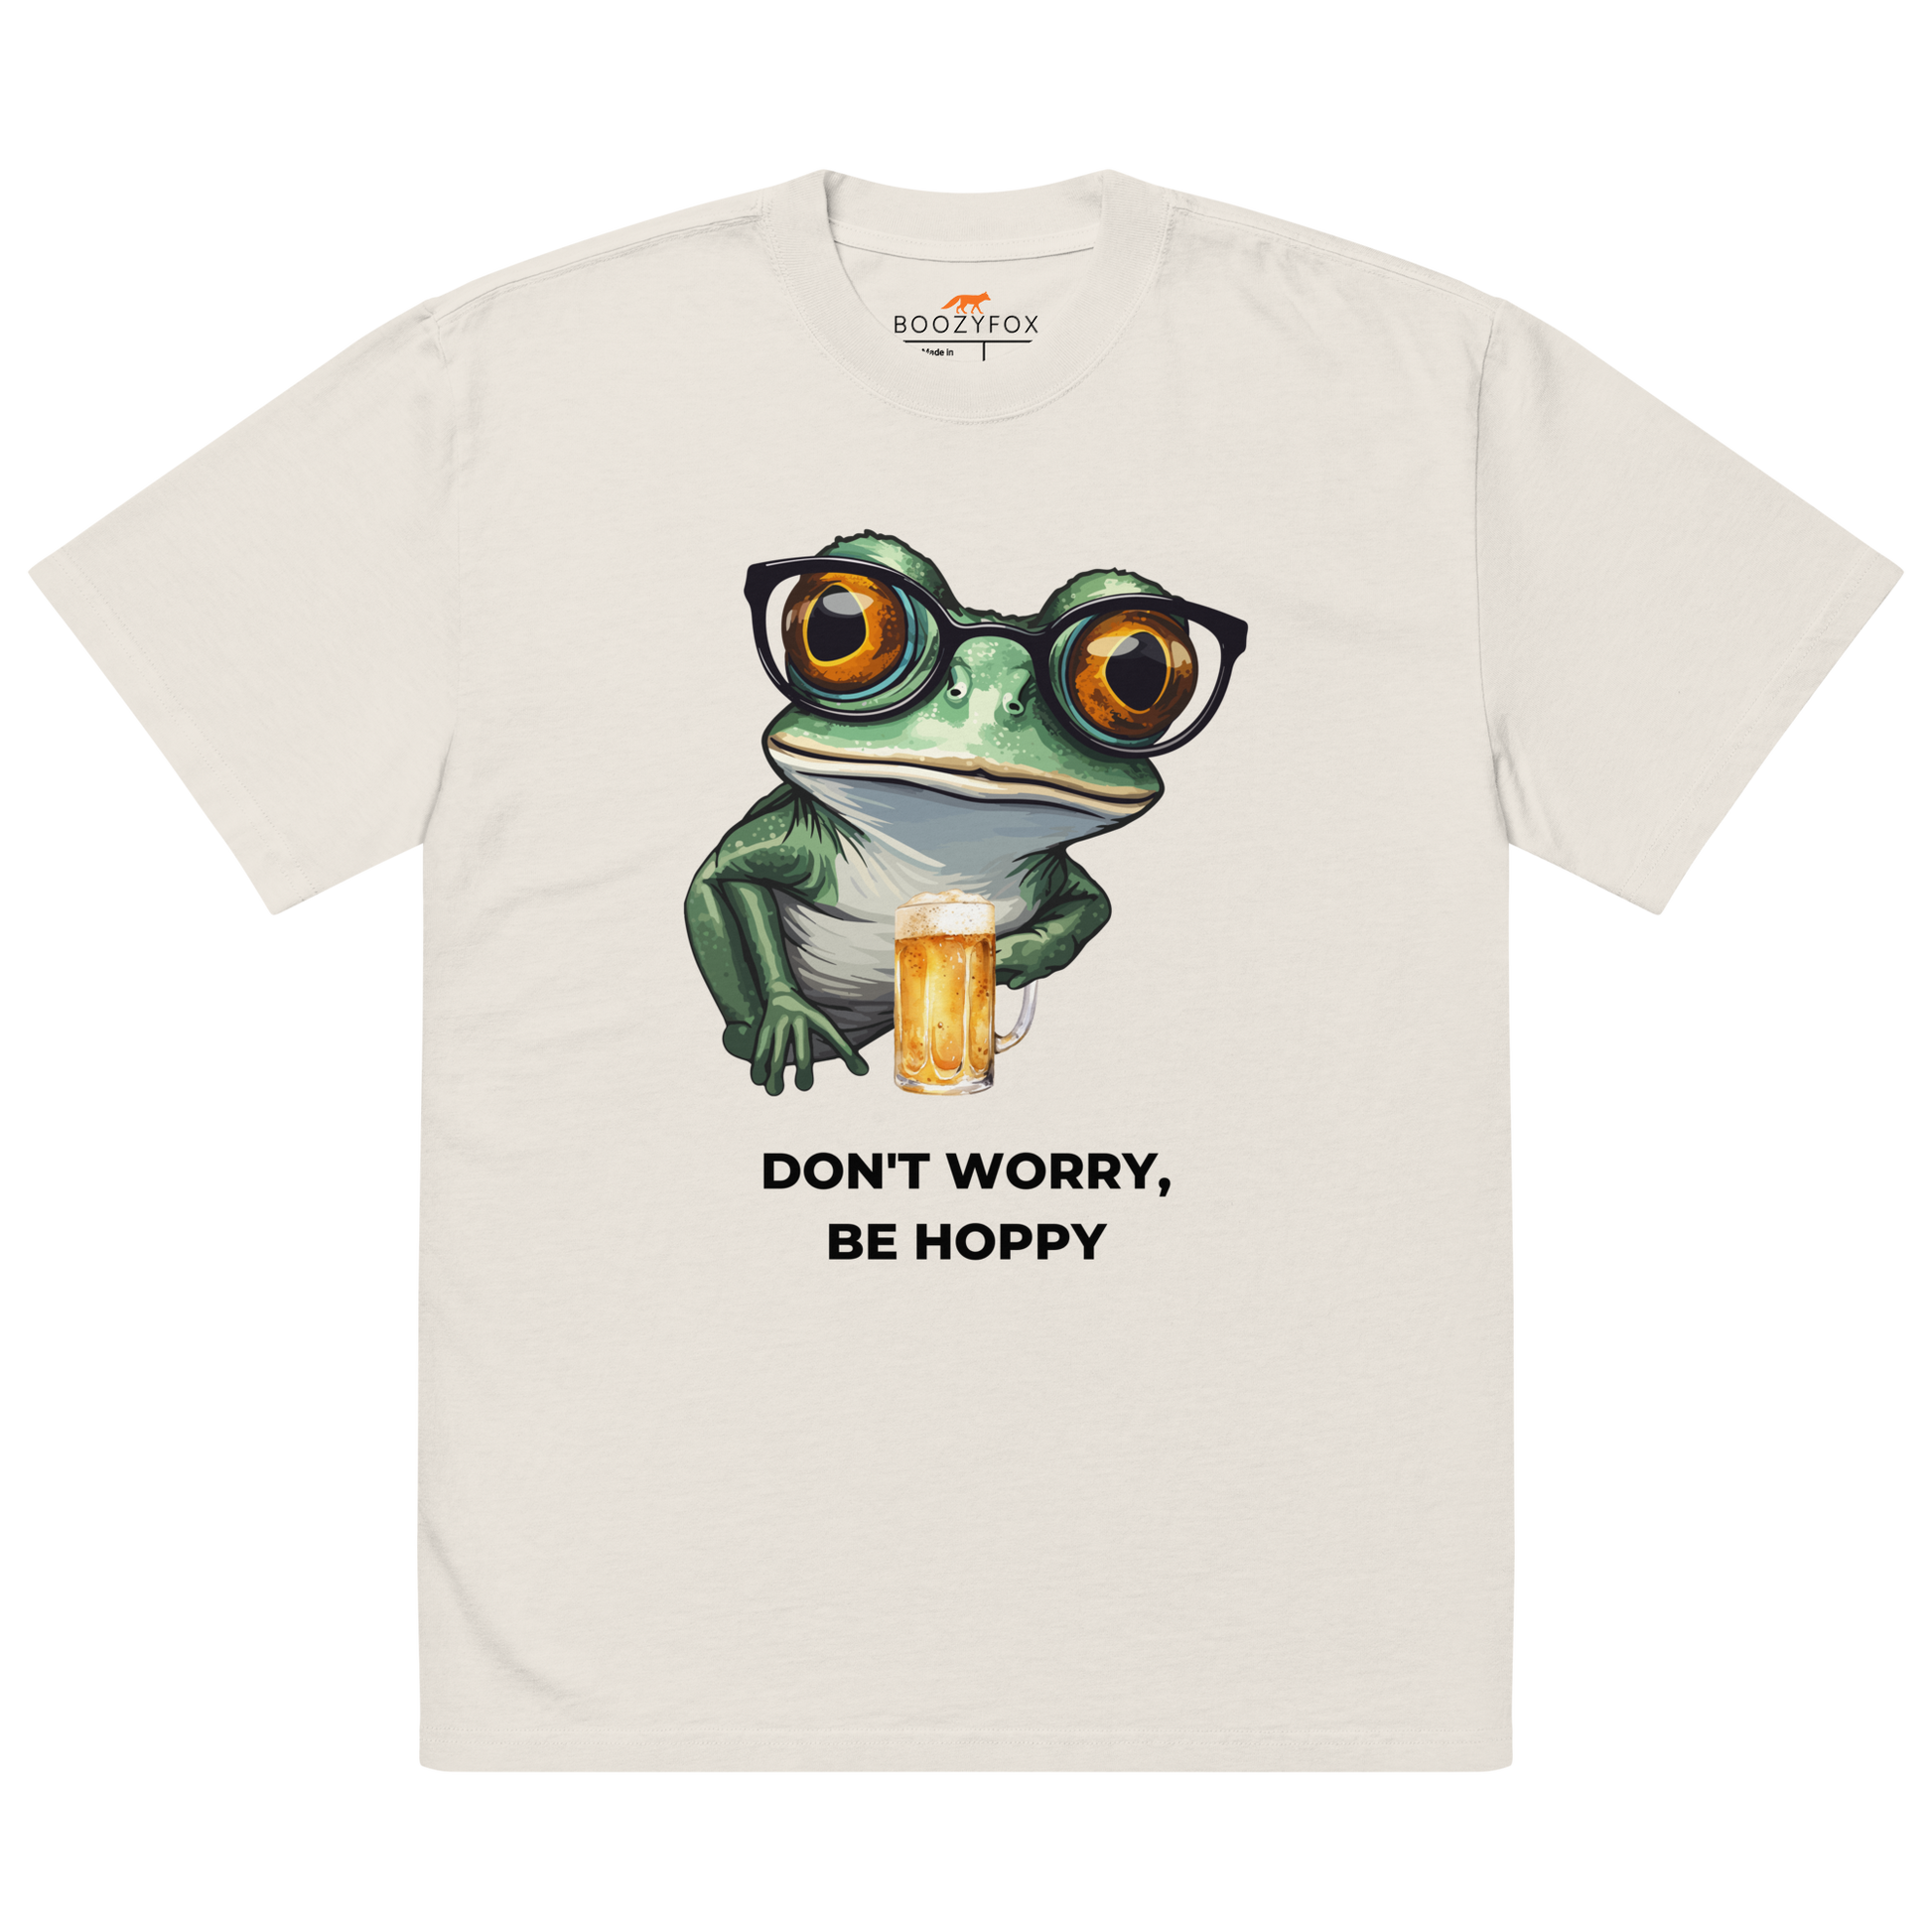 Faded Bone Frog Oversized T-Shirt featuring a ribbitting Don't Worry, Be Hoppy graphic on the chest - Funny Graphic Frog Oversized Tees - Boozy Fox